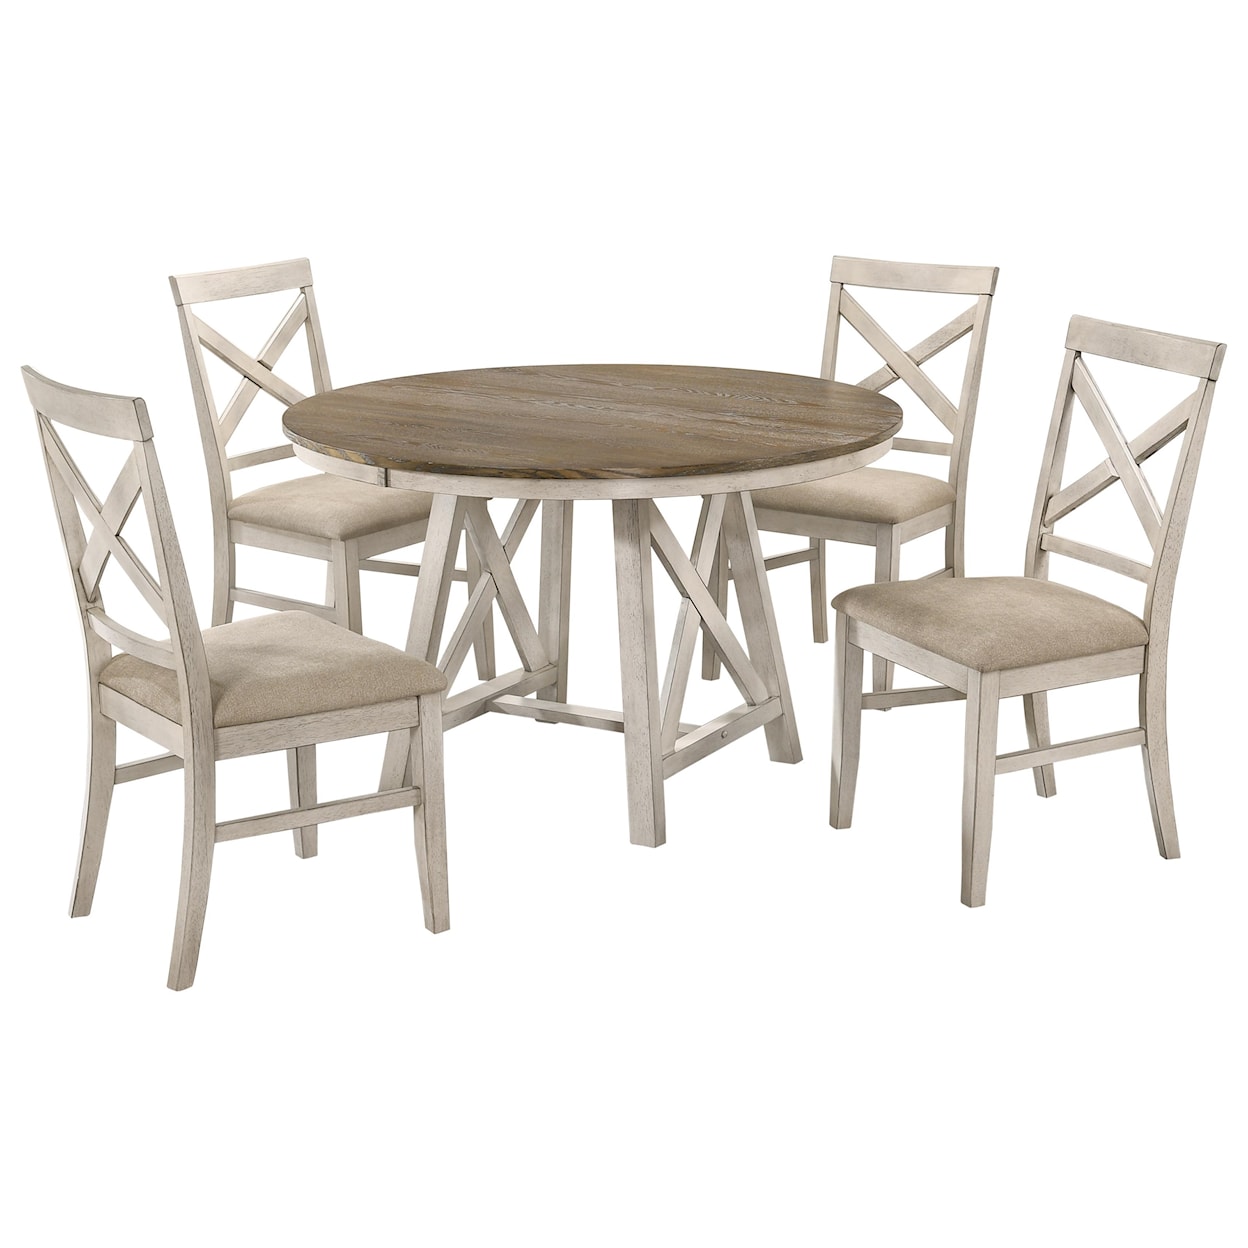 Lacey Furniture Somerset Round Dining Table